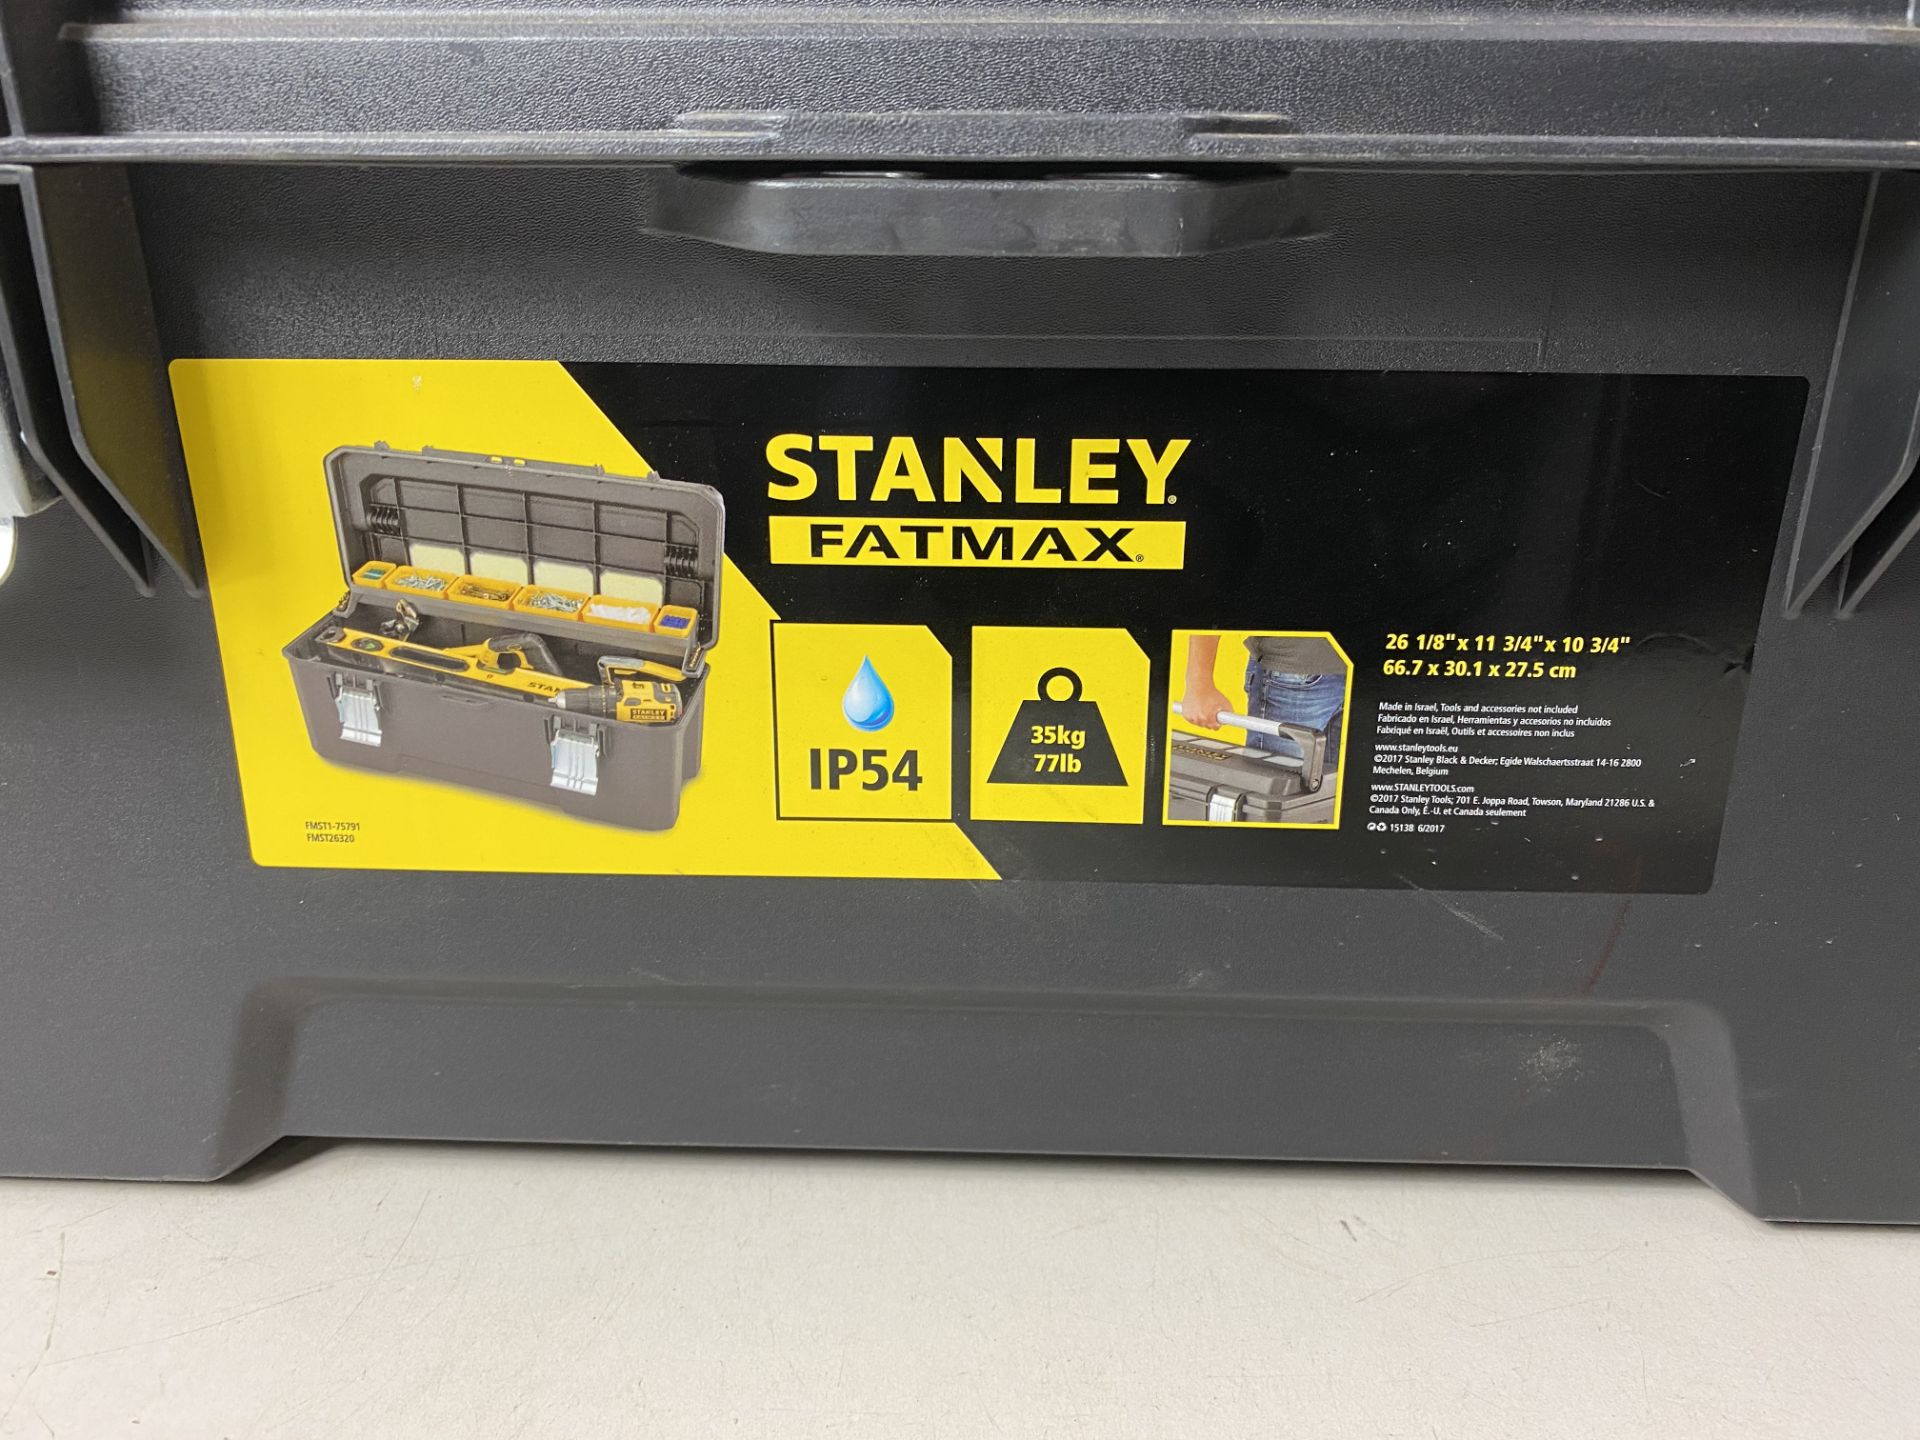 StanleyFMST1-75791 26" FATMAX CANTILEVER PRO TOOLBOX - Image 2 of 3